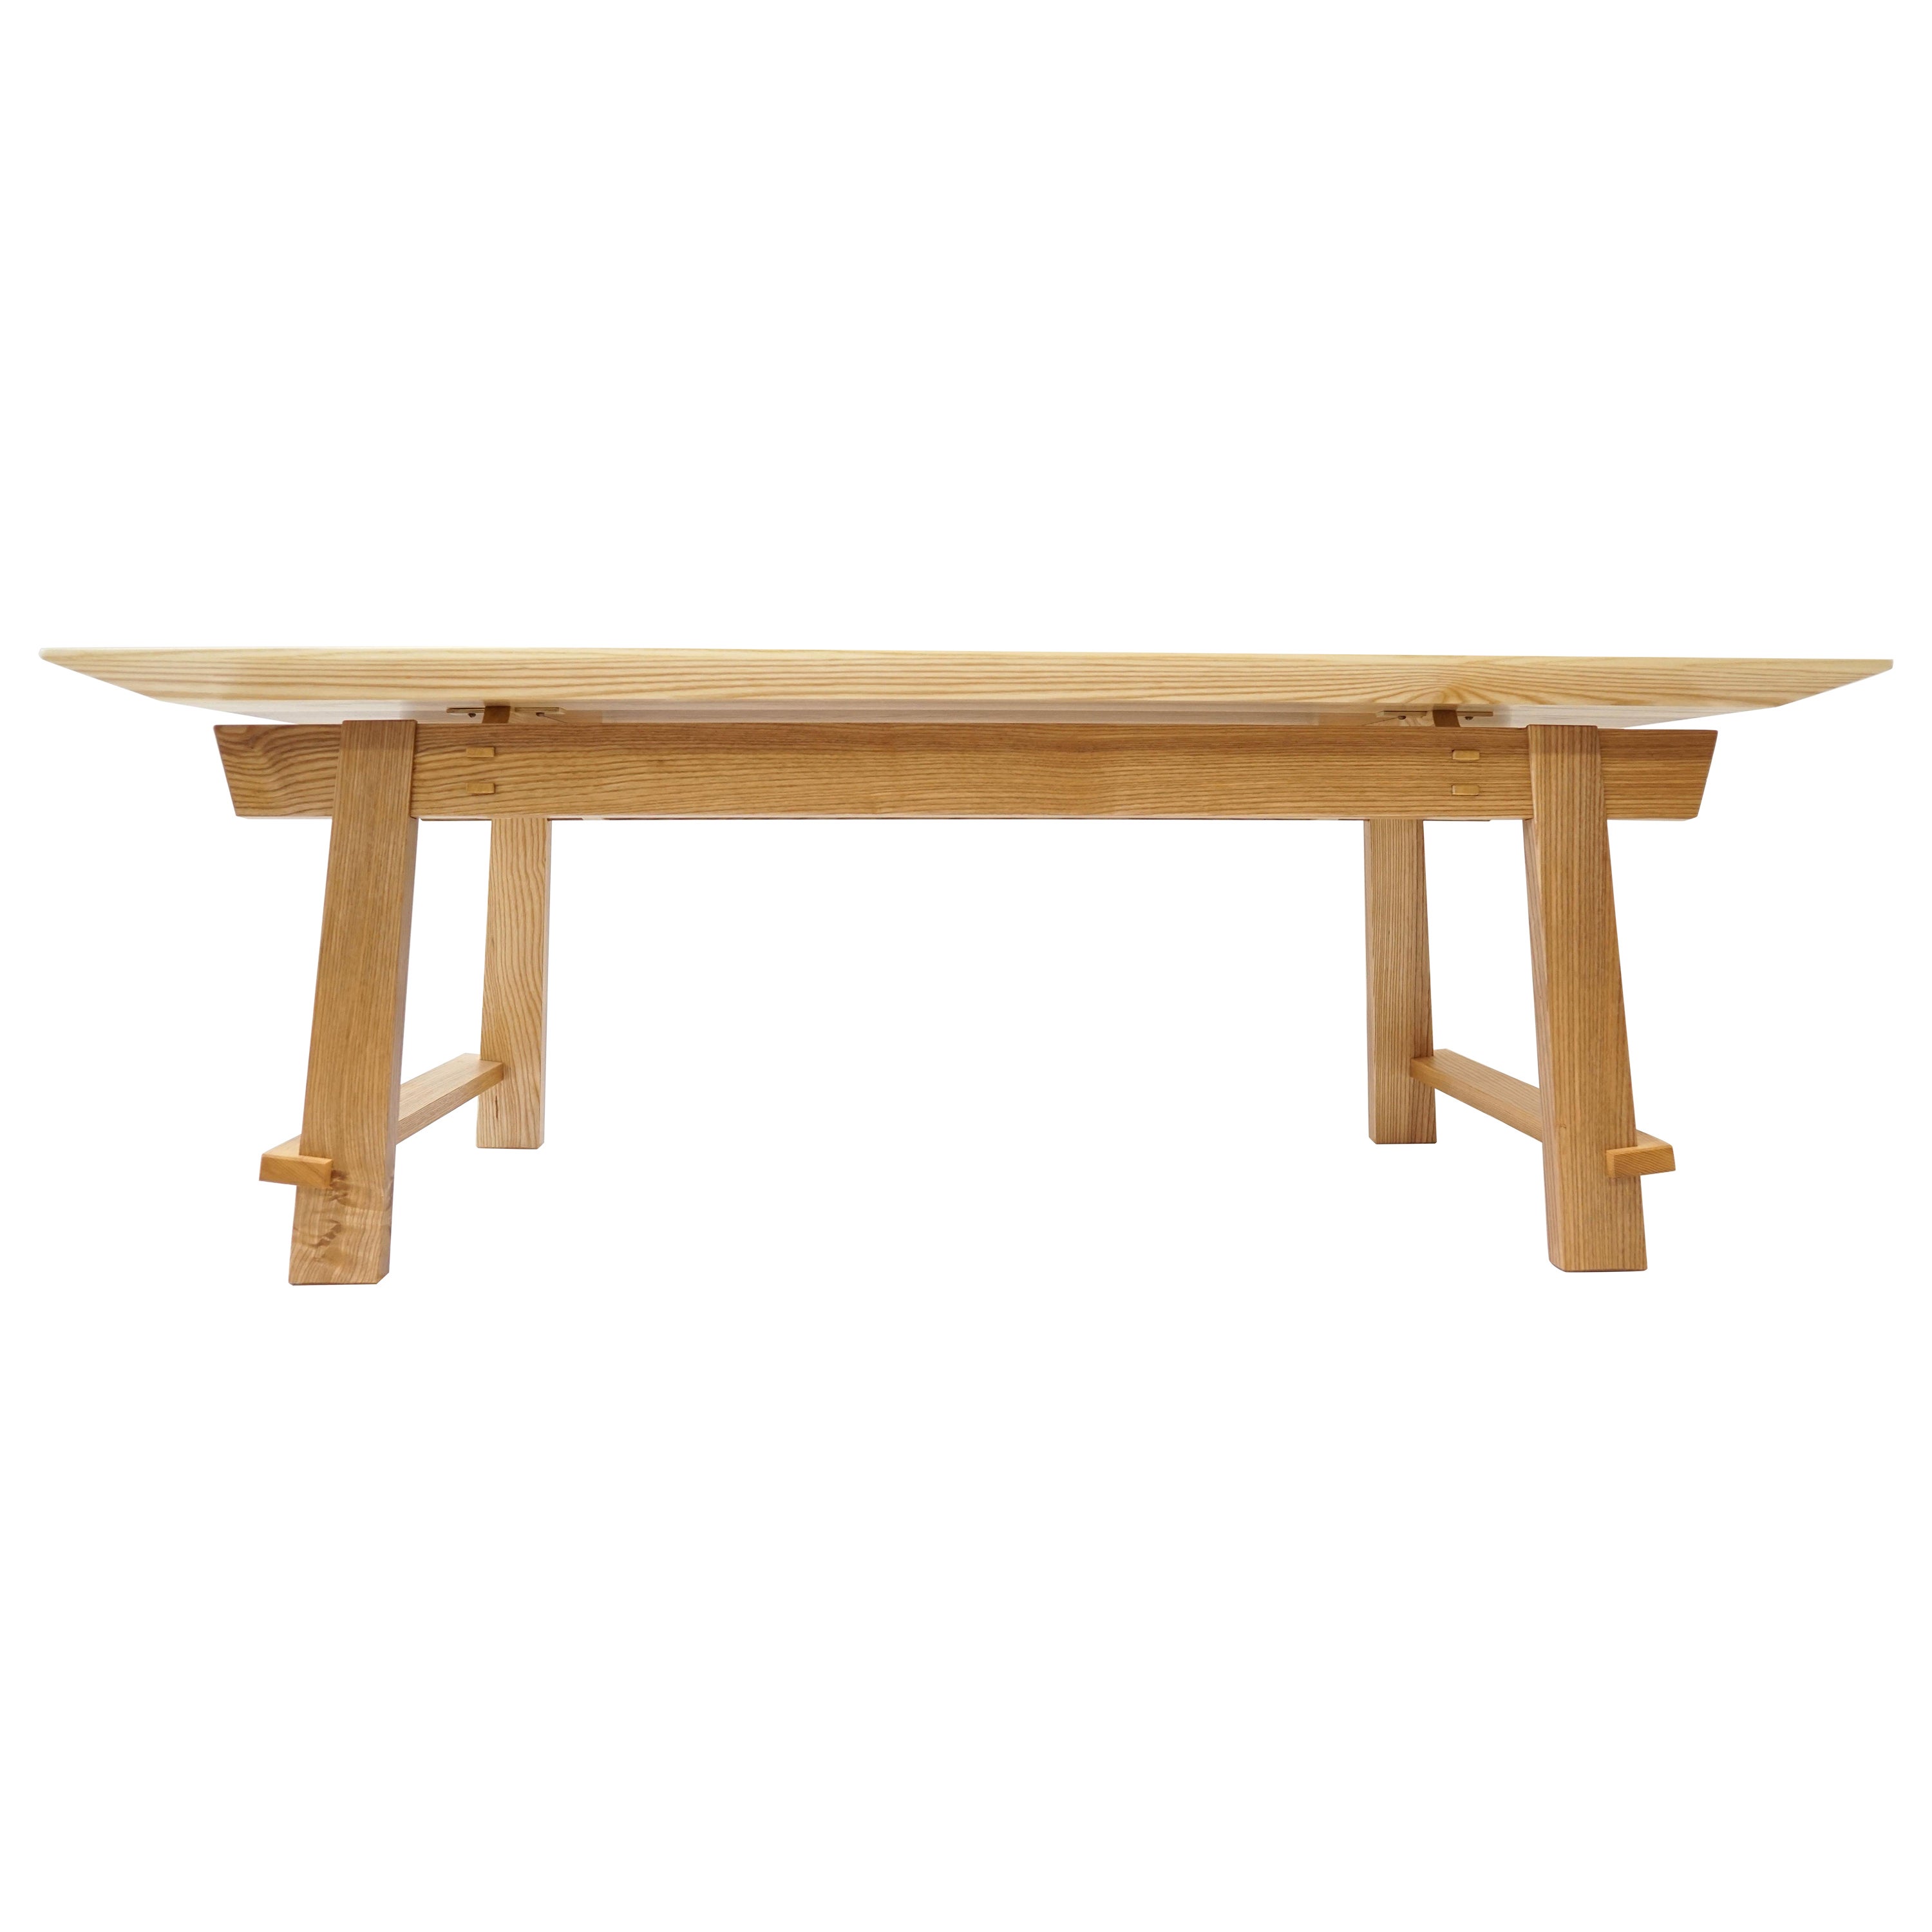 Rilley Coffee Table, Exposed Joinery, Handcrafted in Ash